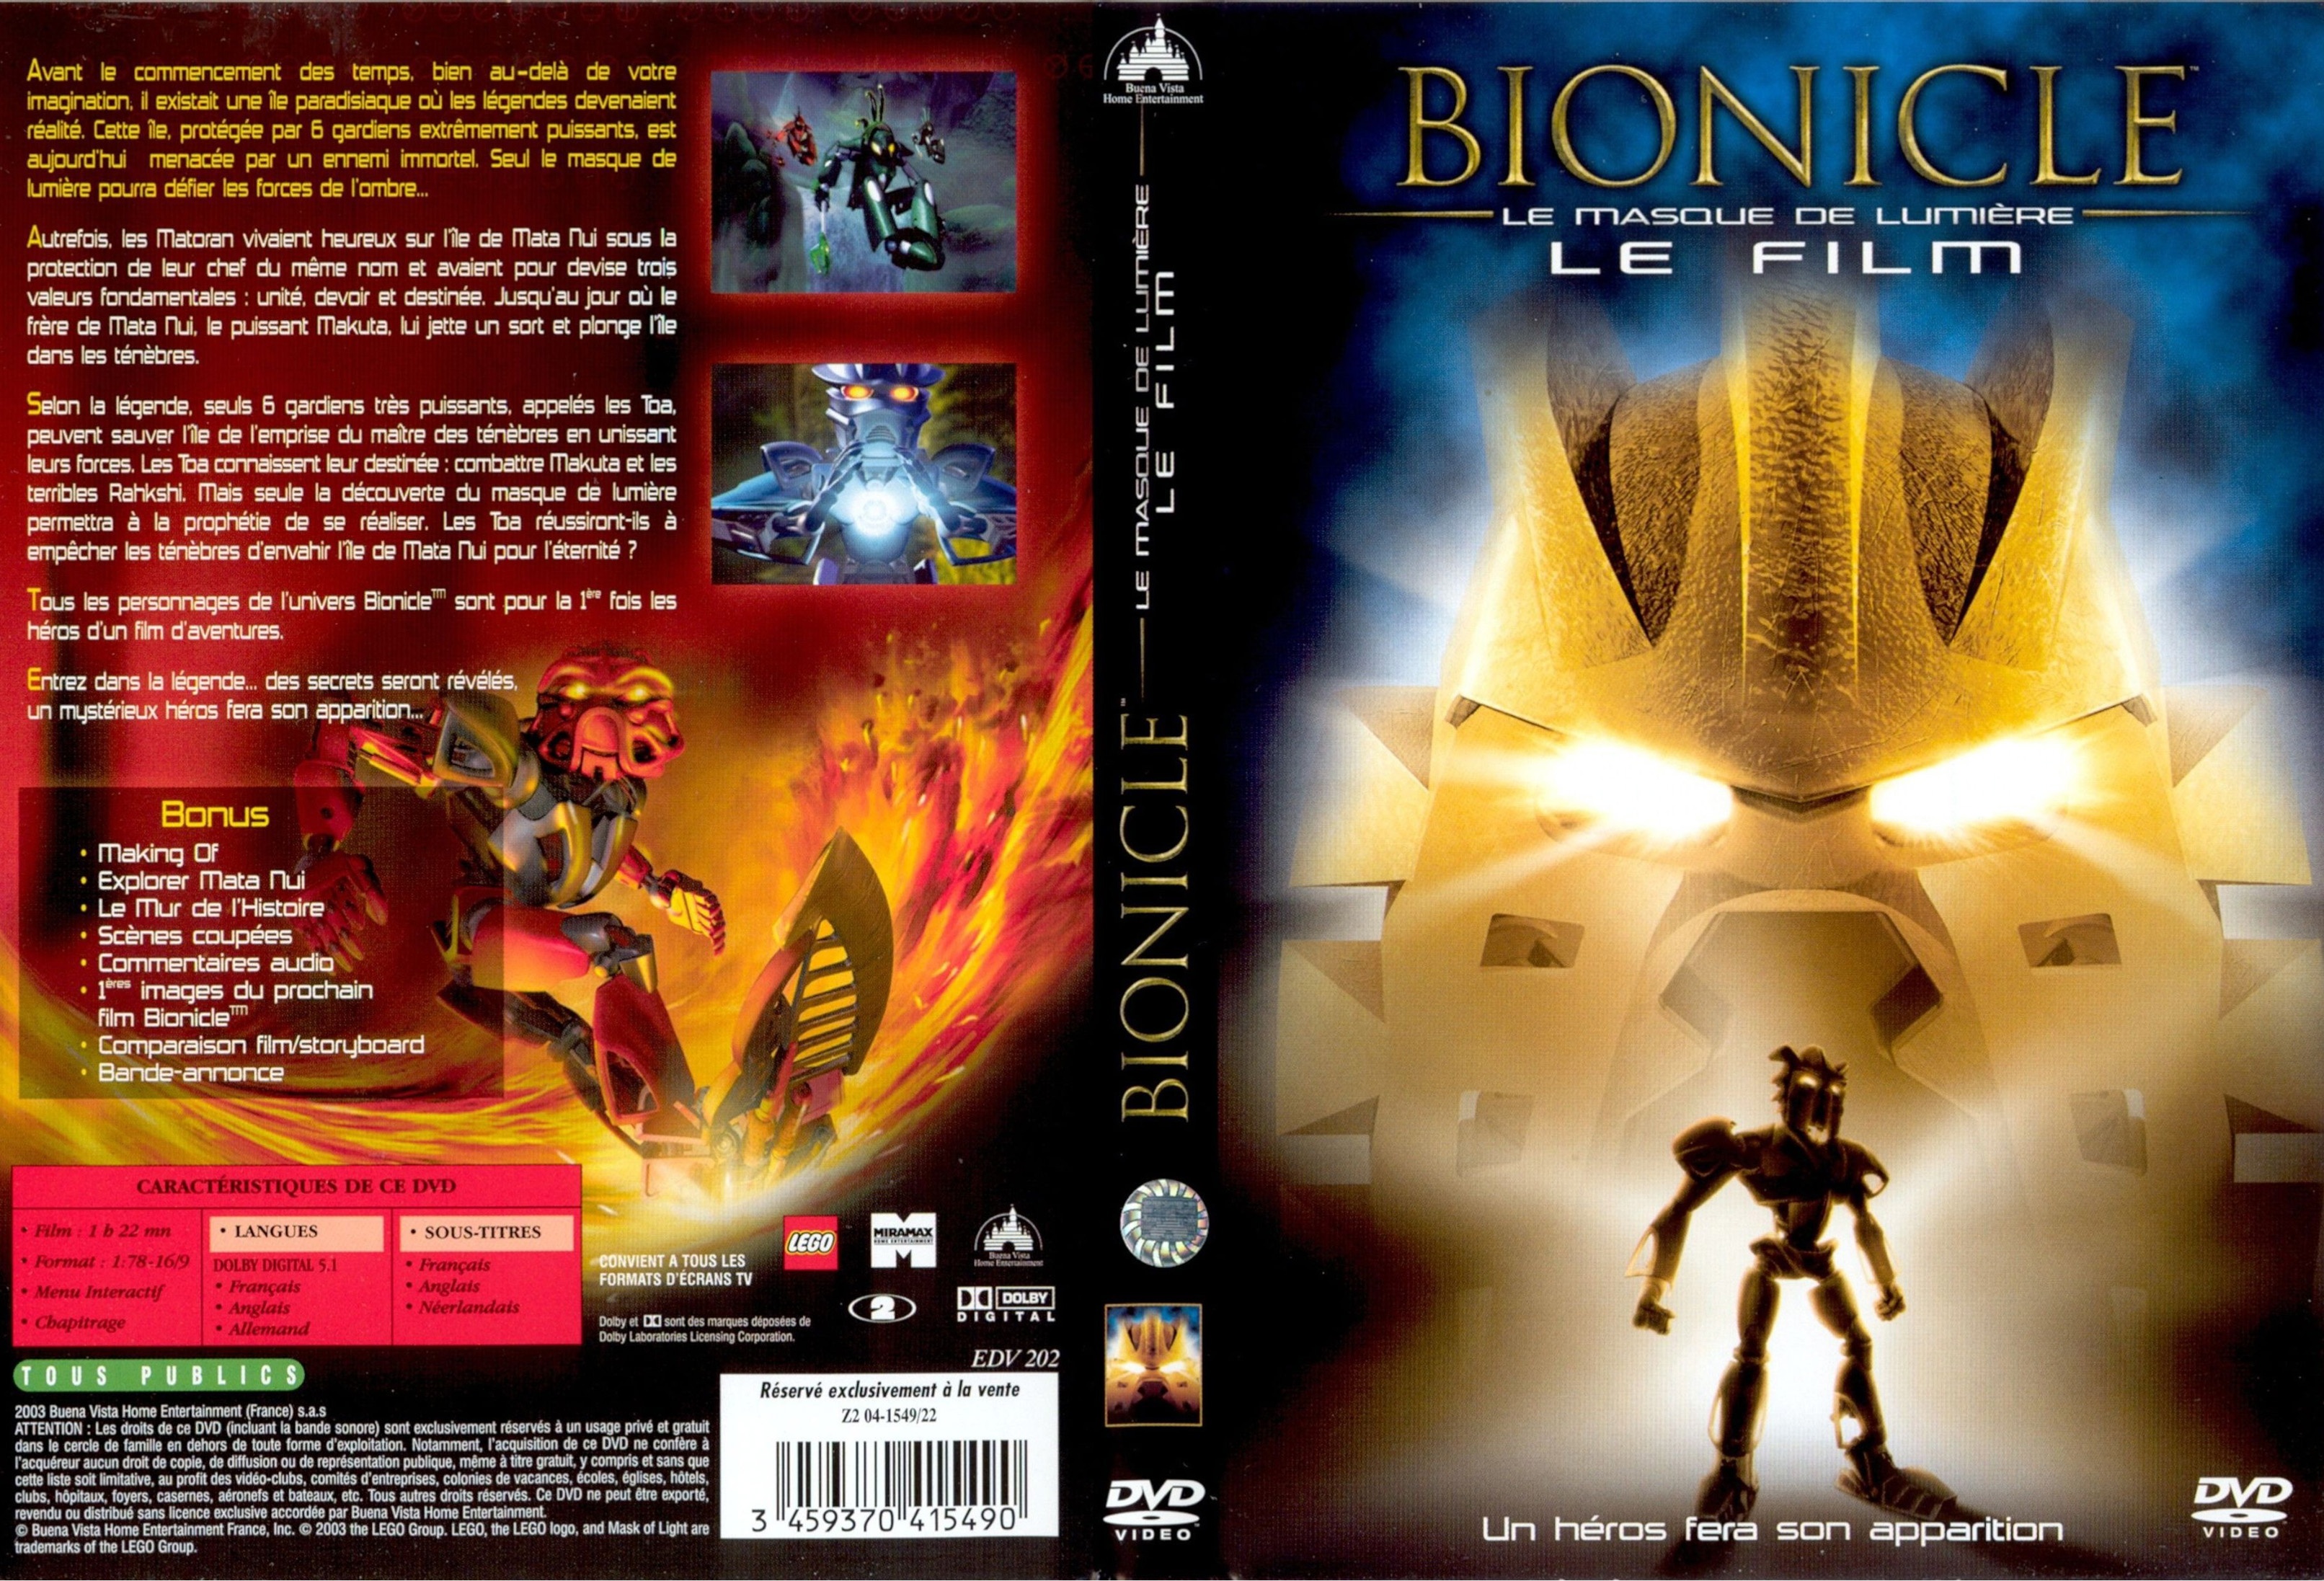 Jaquette DVD Bionicle